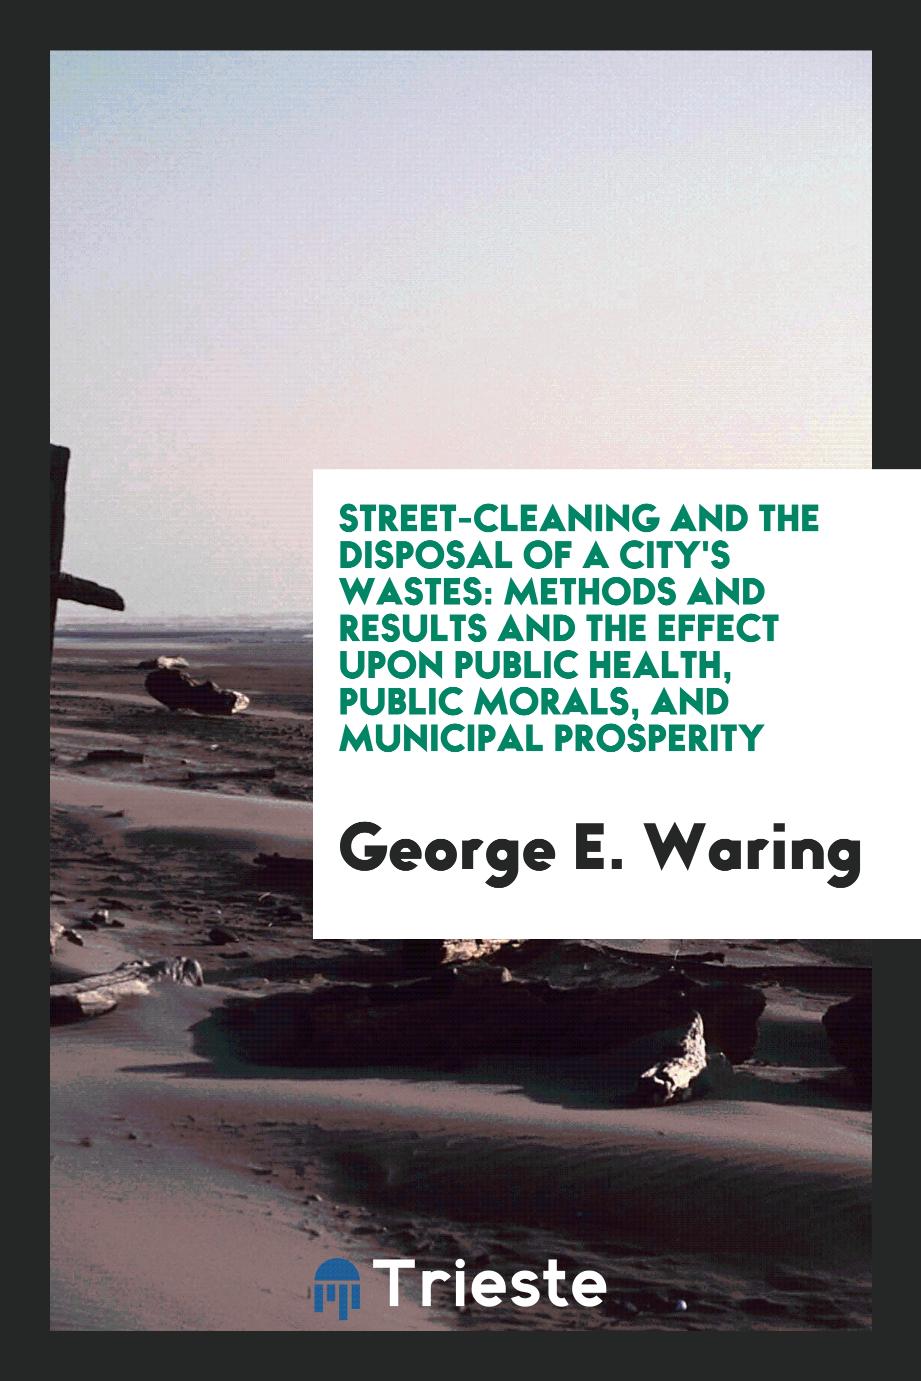 Street-cleaning and the disposal of a city's wastes: methods and results and the effect upon public health, public morals, and municipal prosperity